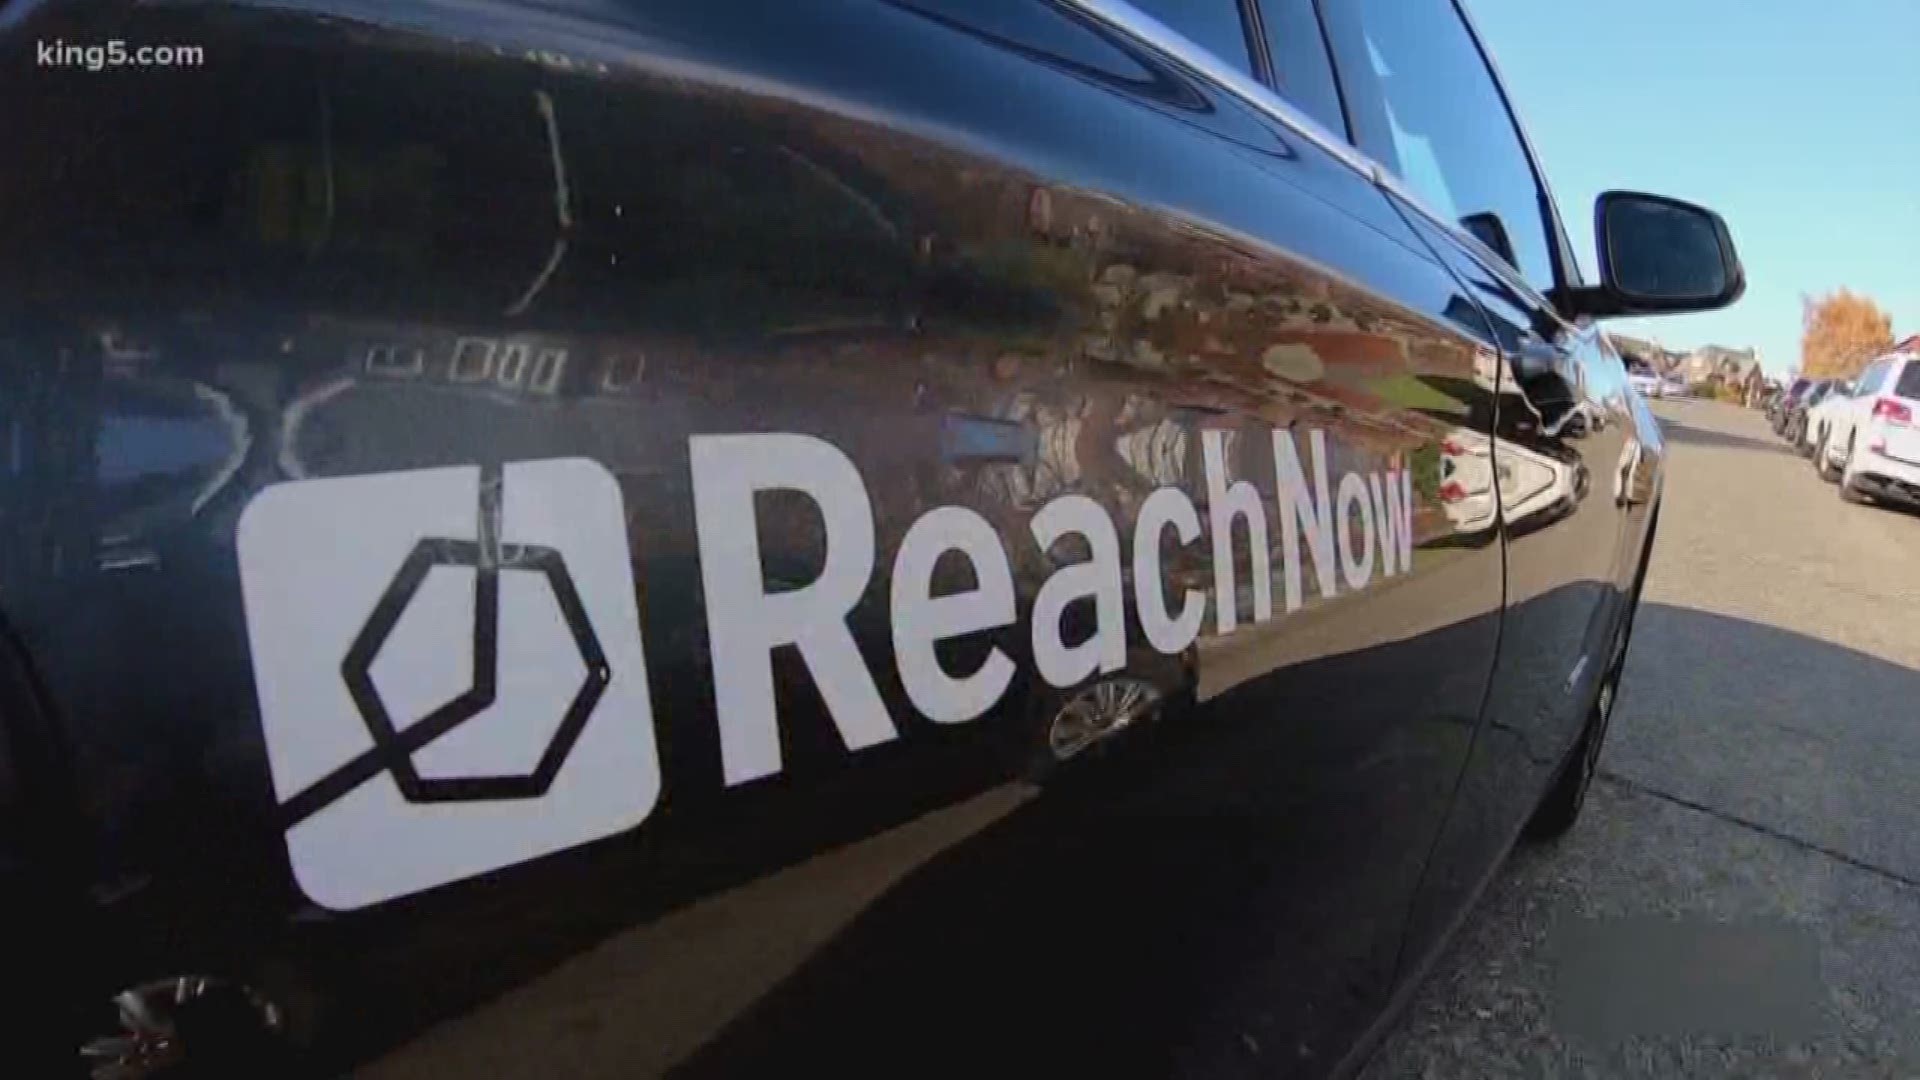 Car-sharing service ReachNow, which has BMWs and Mini Coopers in its fleet, announced its sudden closure on Wednesday.